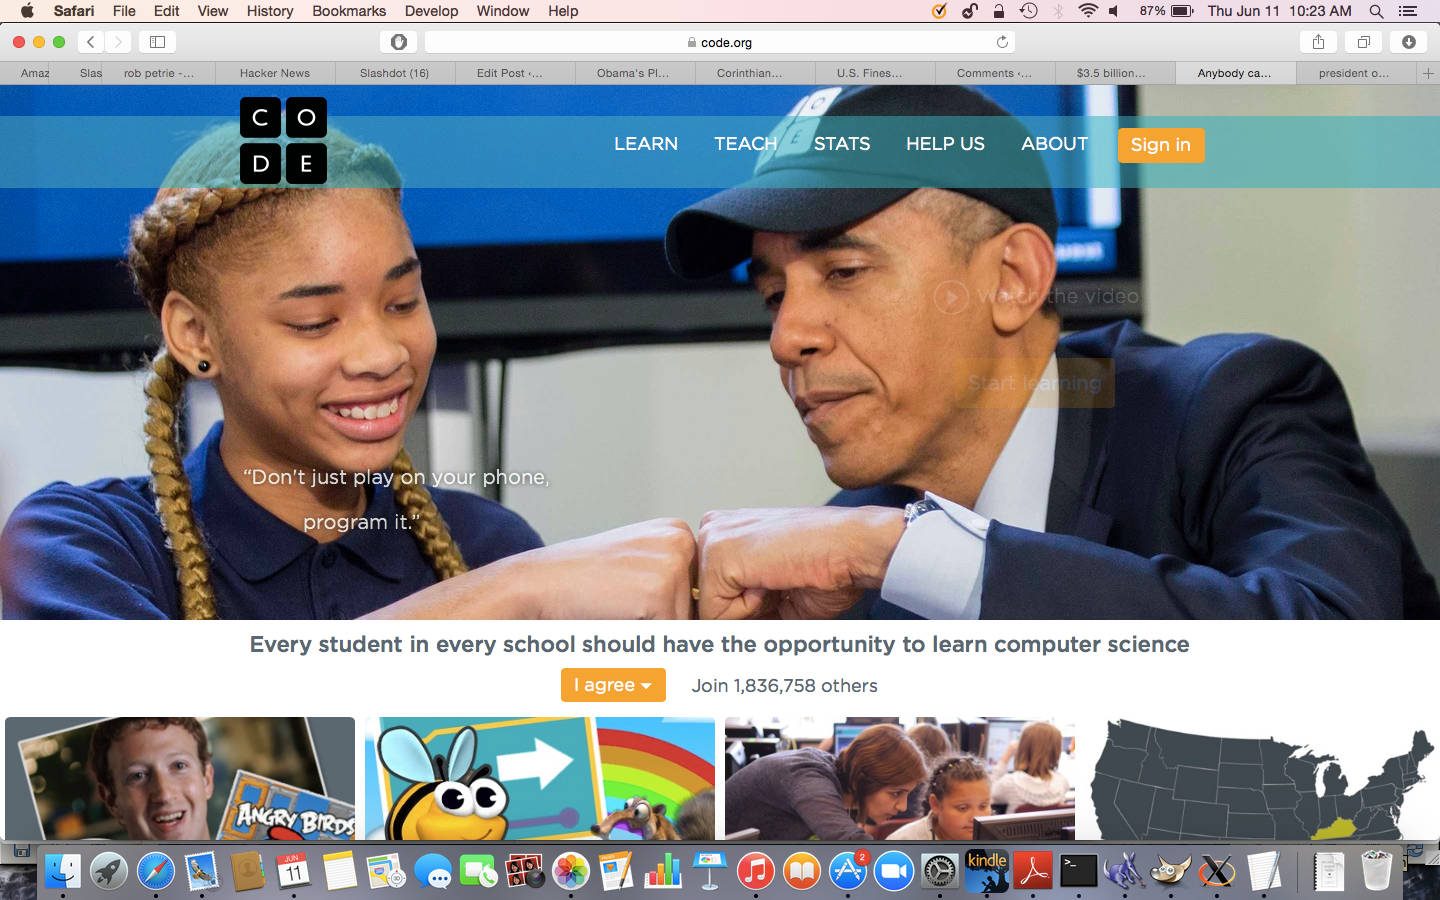 President Obama with Minority Child on Code.Org Website